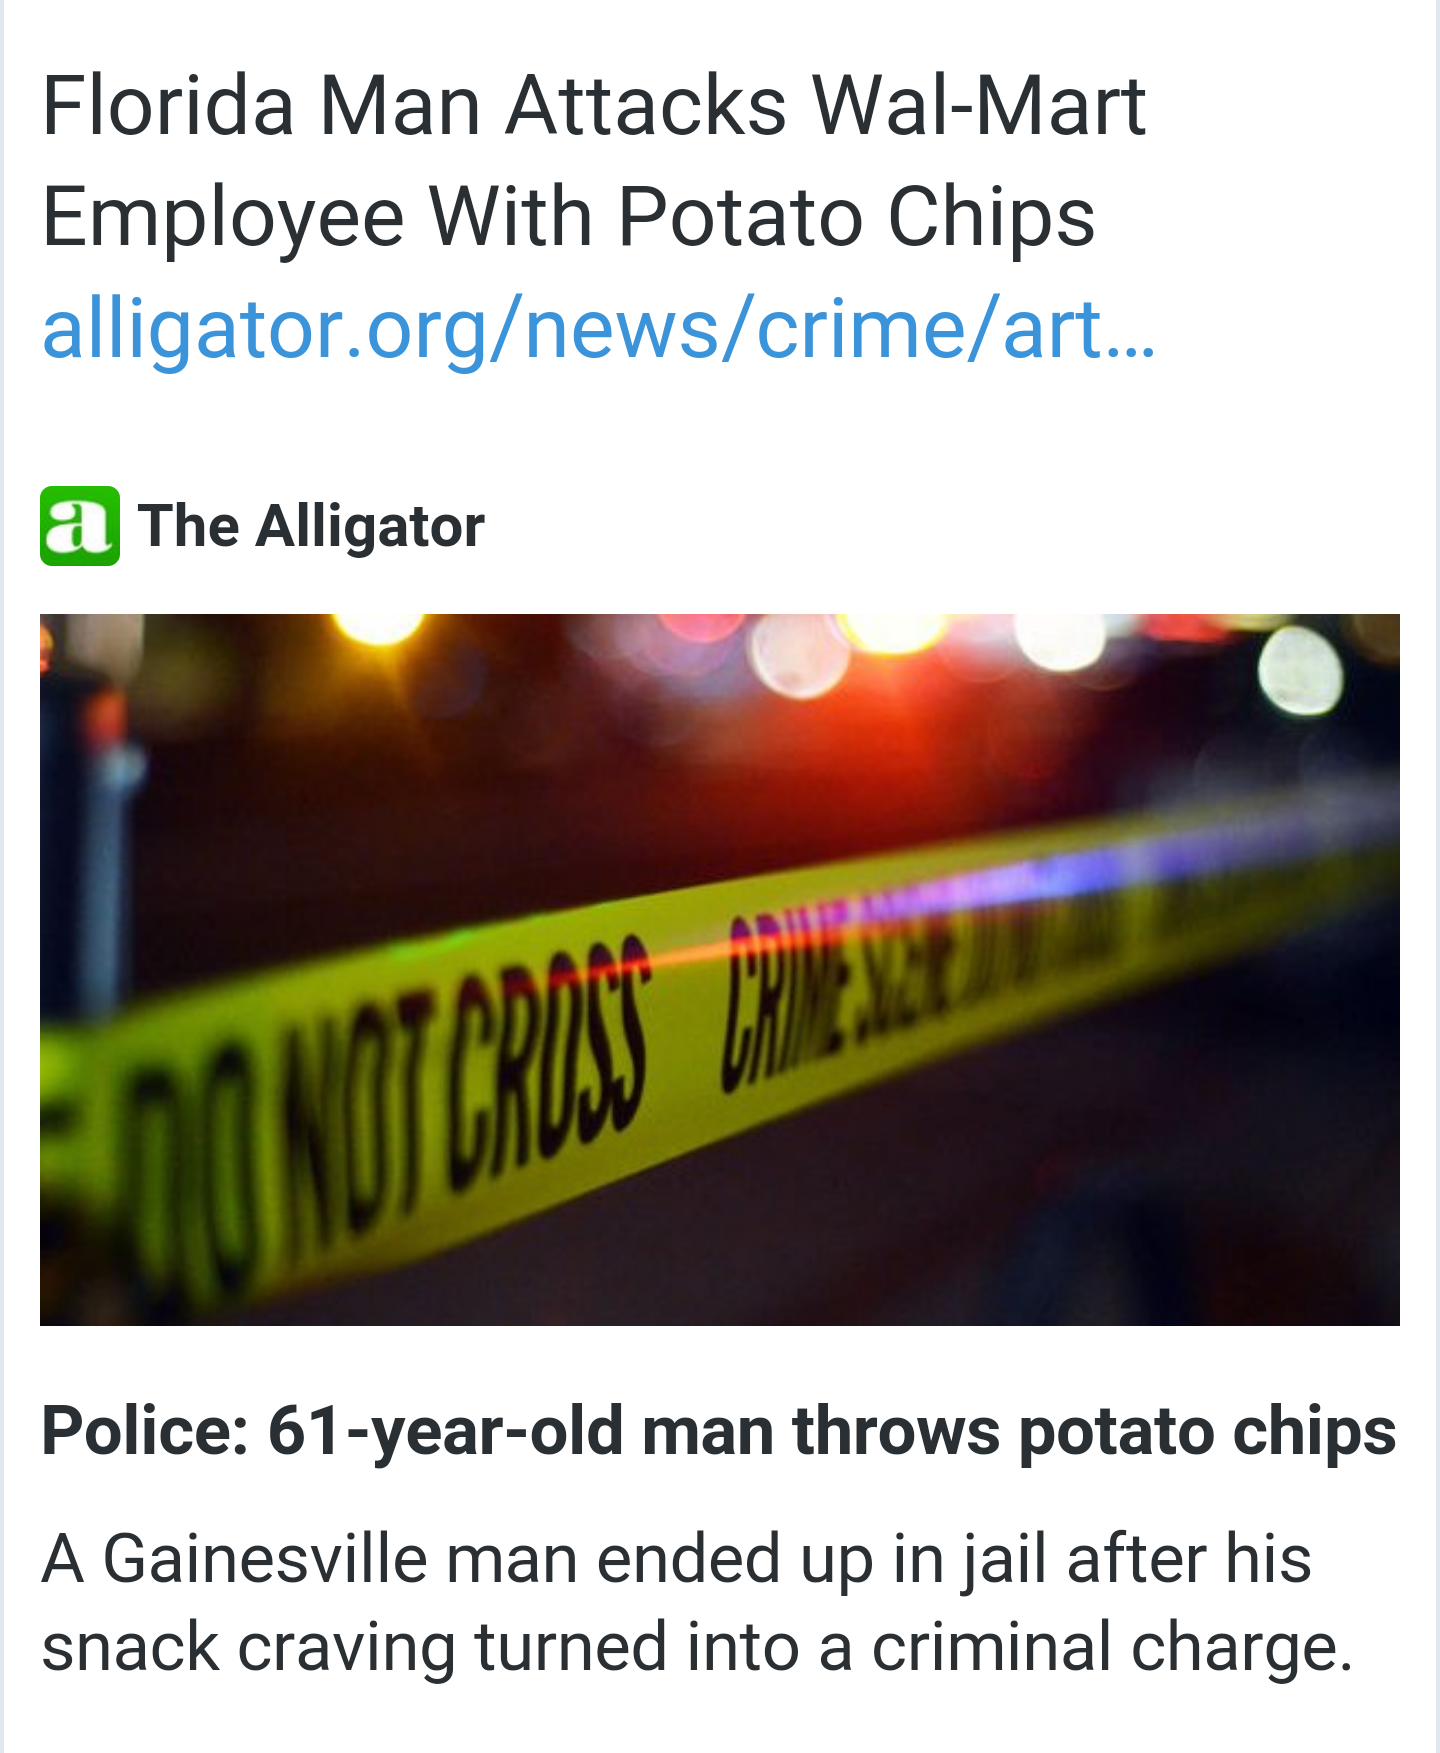 presentation - Florida Man Attacks WalMart Employee With Potato Chips alligator.orgnewscrimeart... a The Alligator Mont Crit Police 61yearold man throws potato chips A Gainesville man ended up in jail after his snack craving turned into a criminal charge.